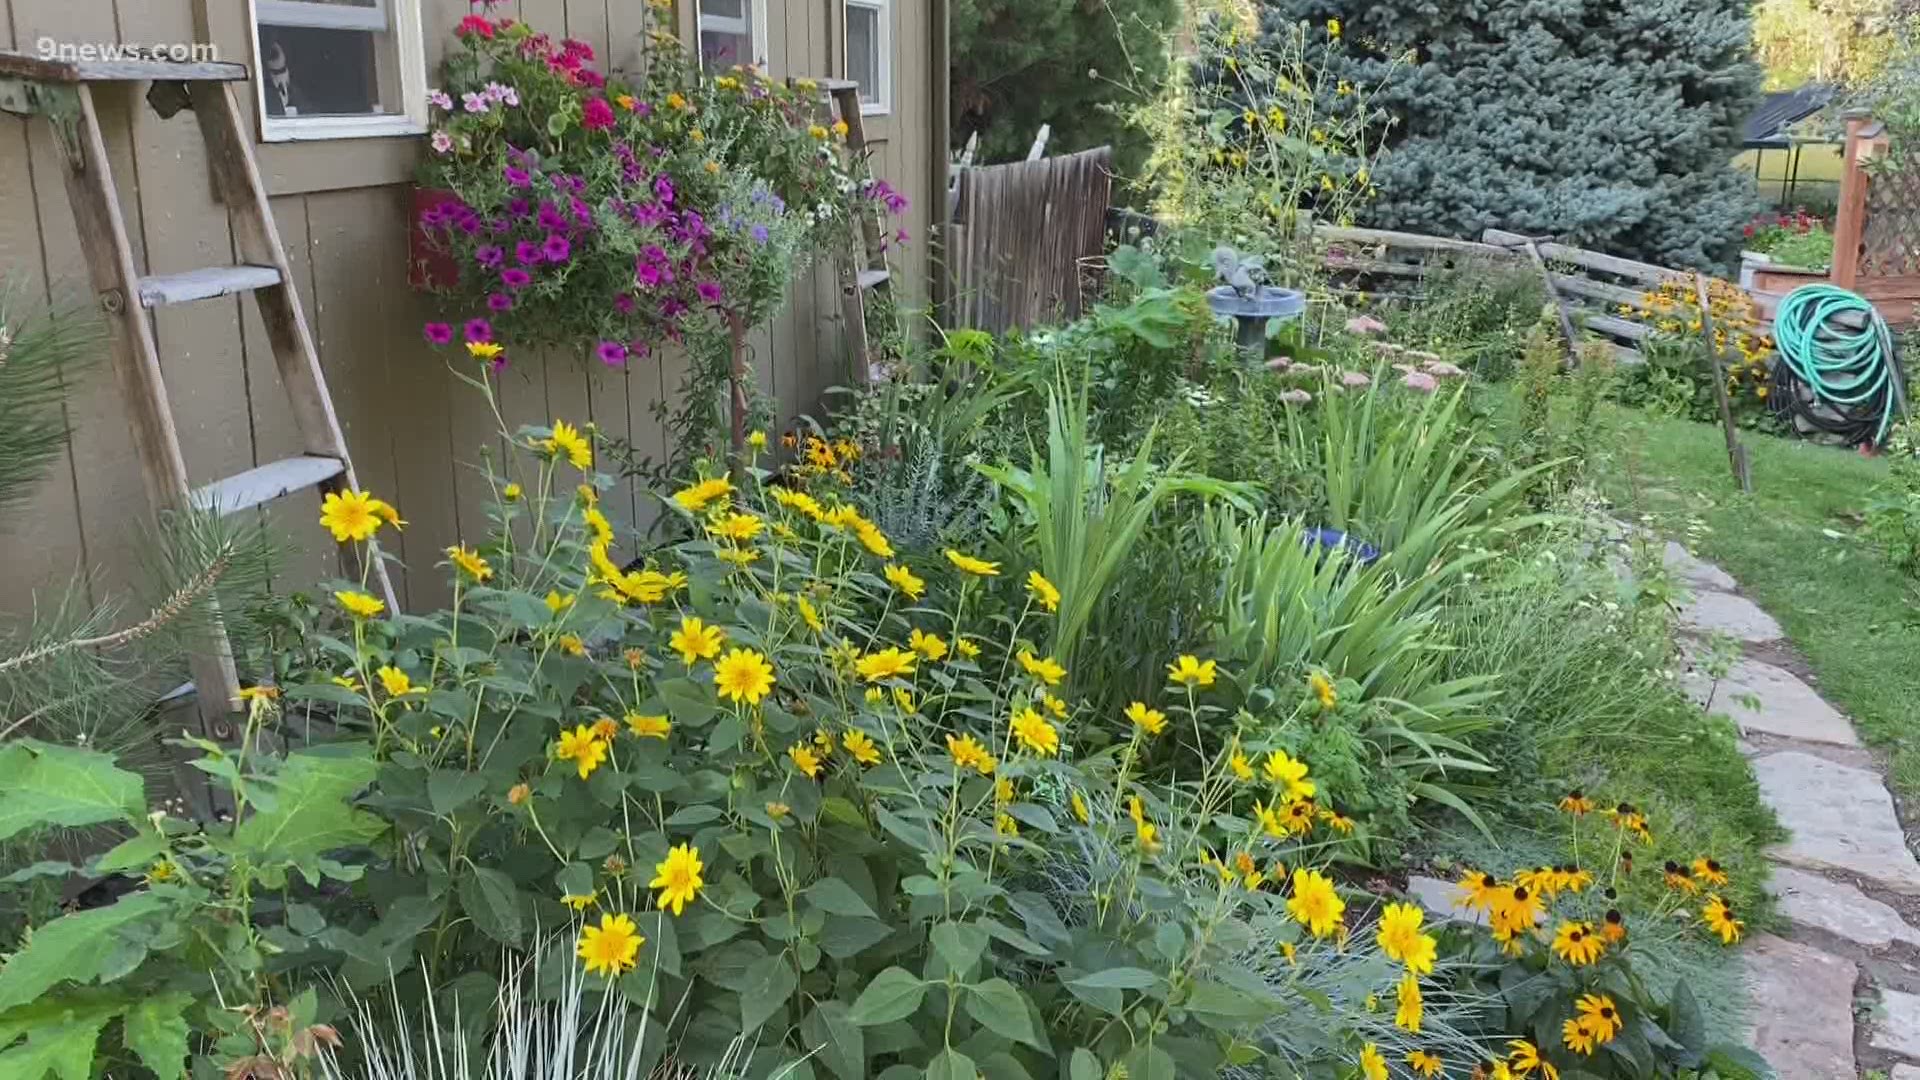 With an early September cold front on the way, here are some tips on how to prepare your late summer garden for the snow and cold.